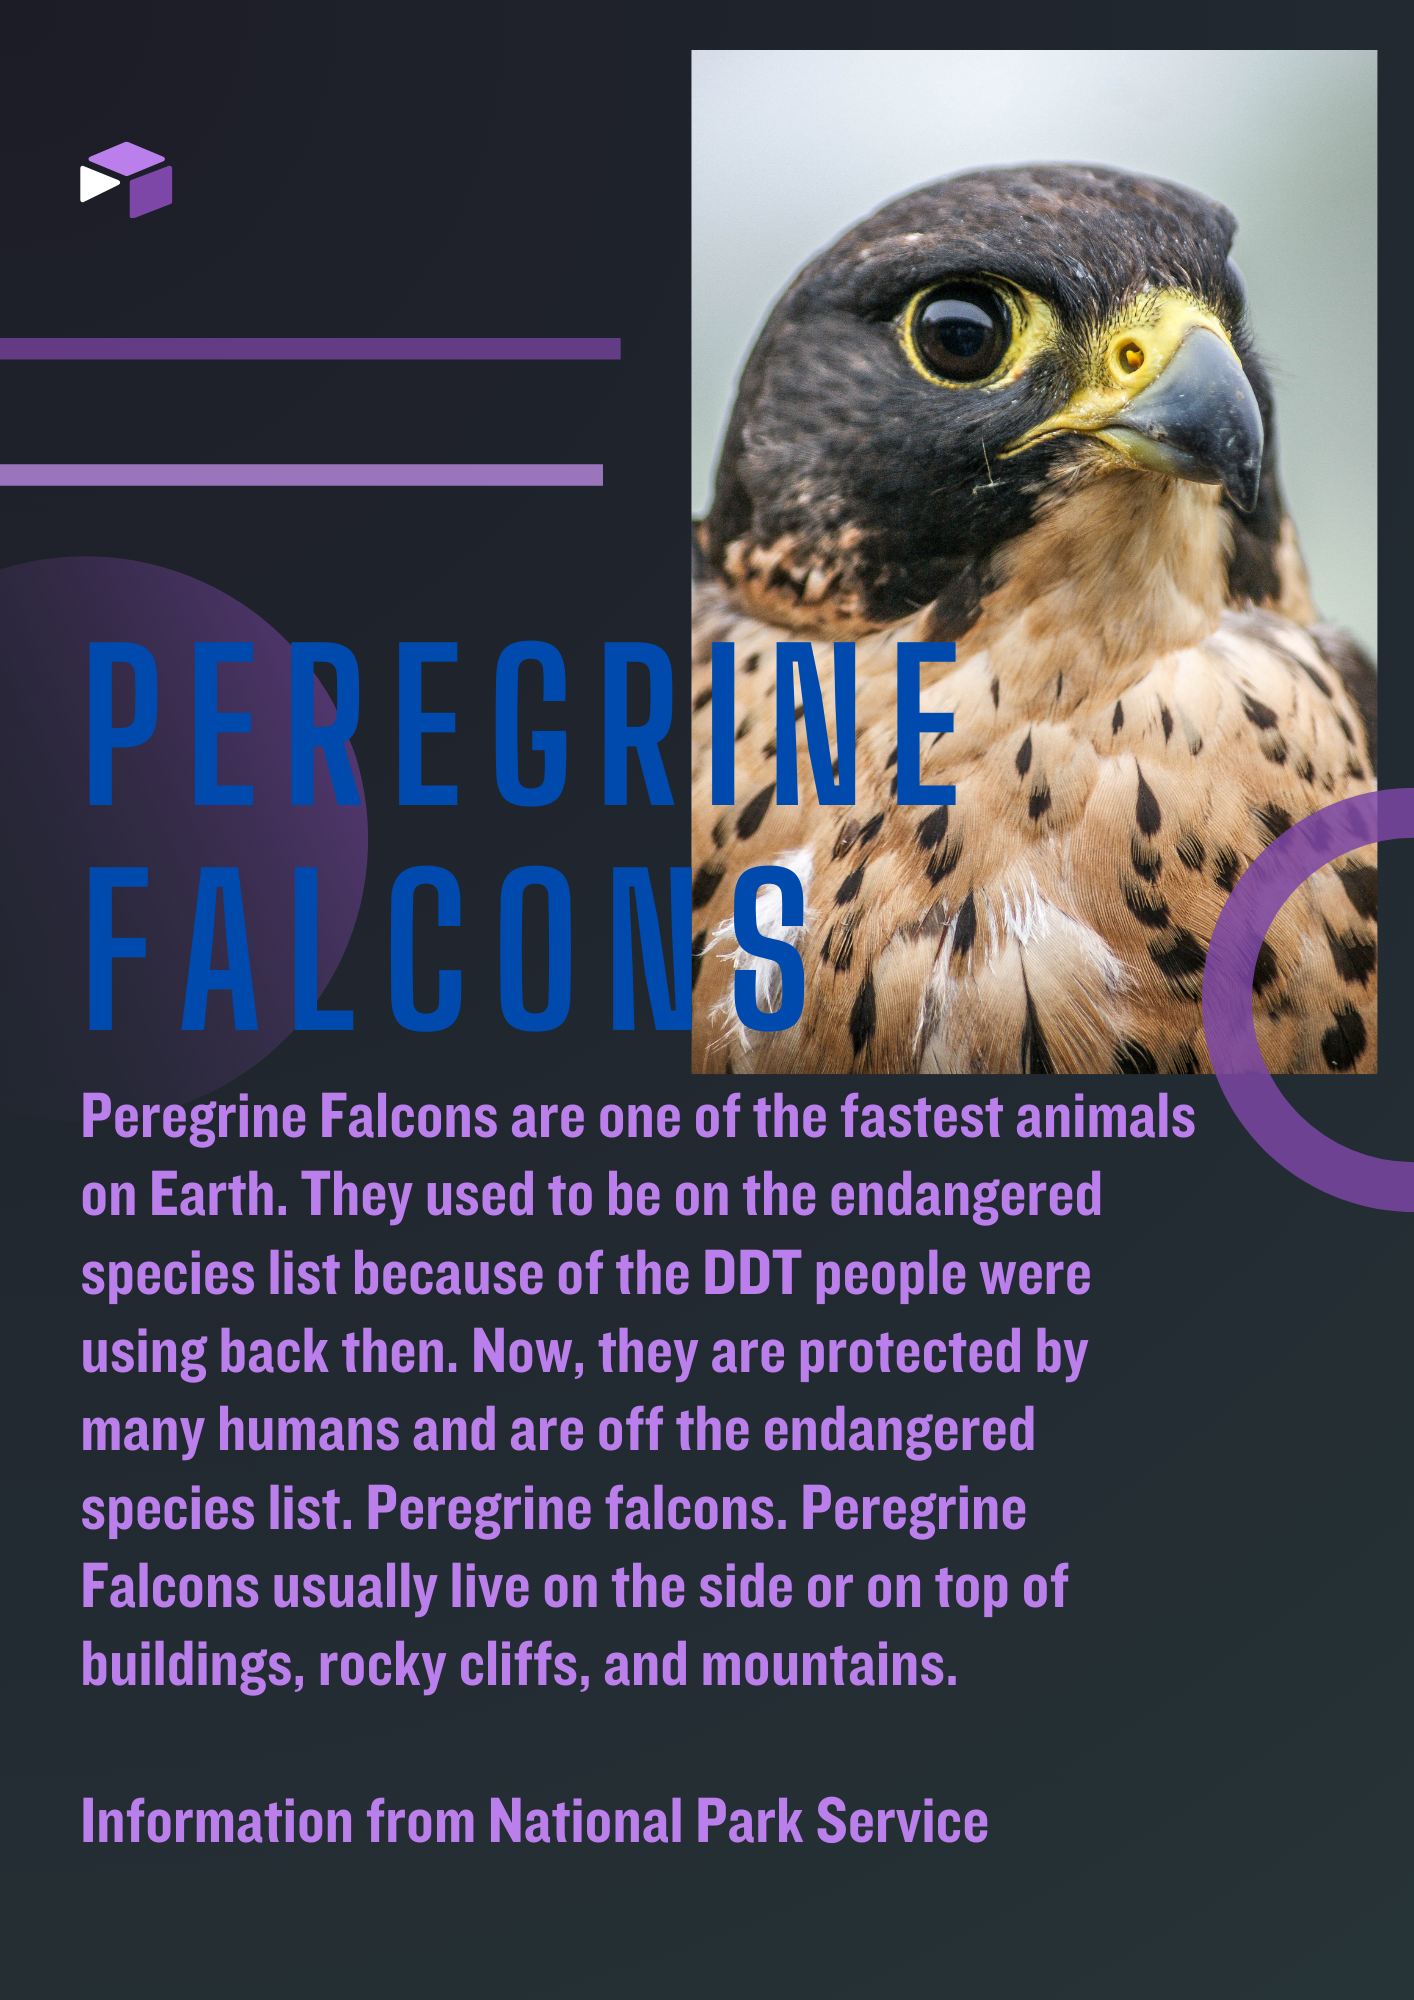 A poster reading "peregrine falcons are one of the fastest animals on earth. They used to be on the endangered species list because of the DDT people were using back then. Now, they are protected by many humans and off the endangered species list. Peregrine falcons usually life on the side of on the top of buildings, rocky cliffs and mountains. Information from the National Park Service.